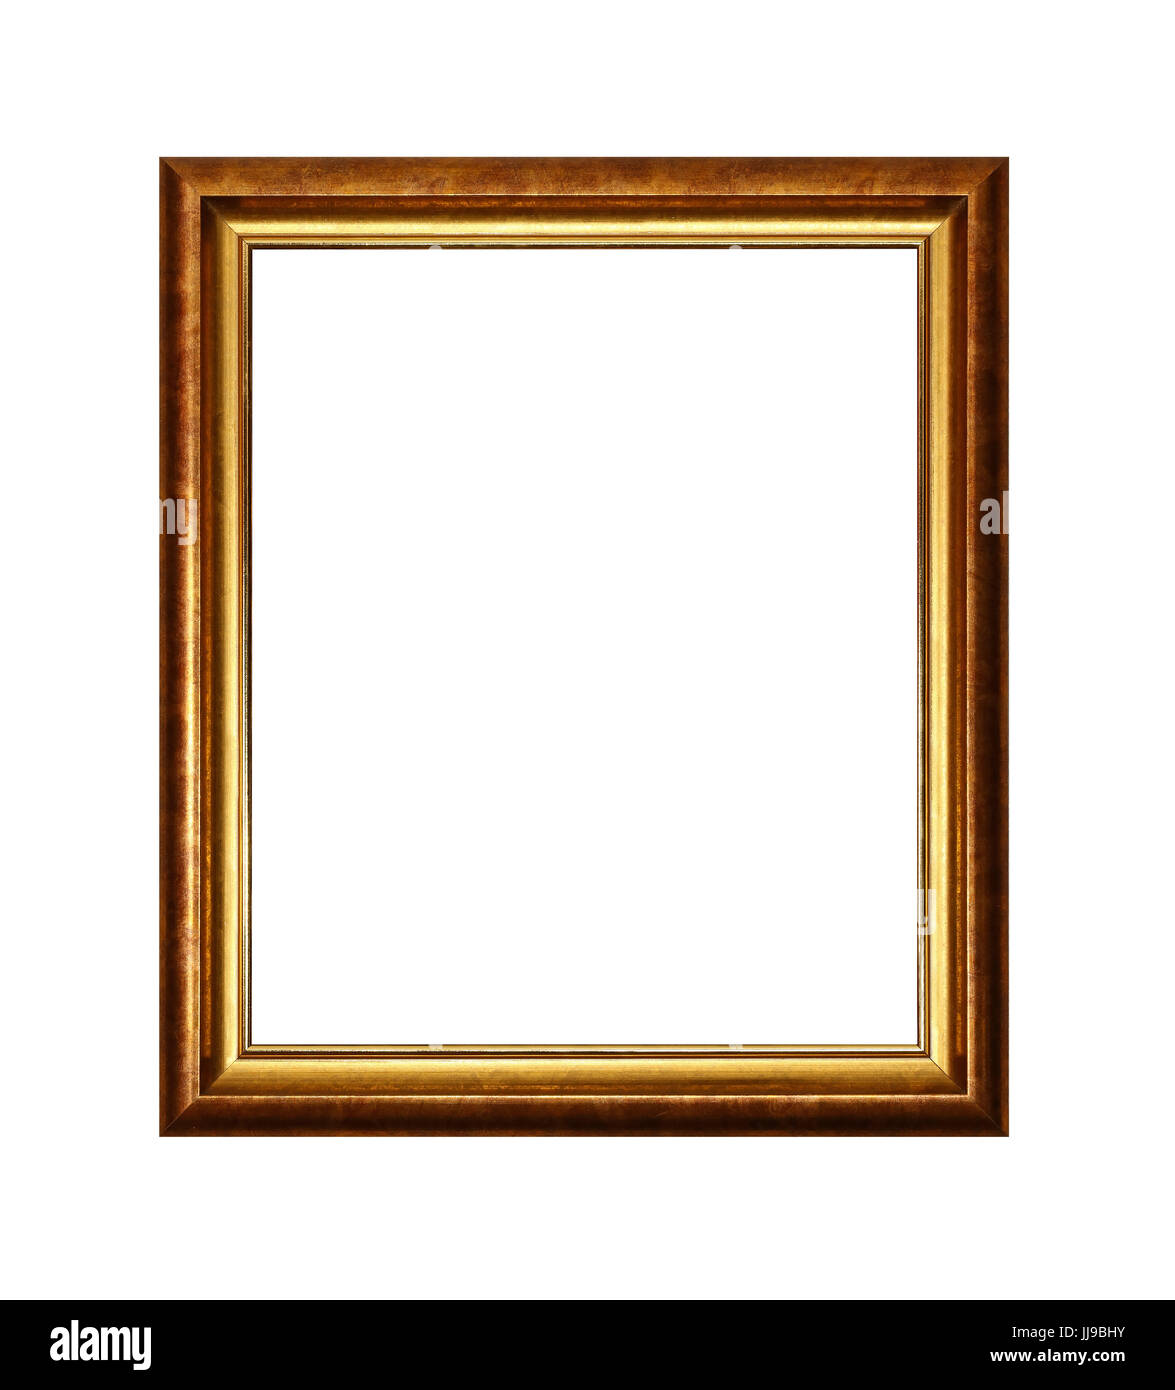 Vintage old wooden classic bronze and golden painted vertical rectangular frame for picture or photo, isolated on white background, close up Stock Photo